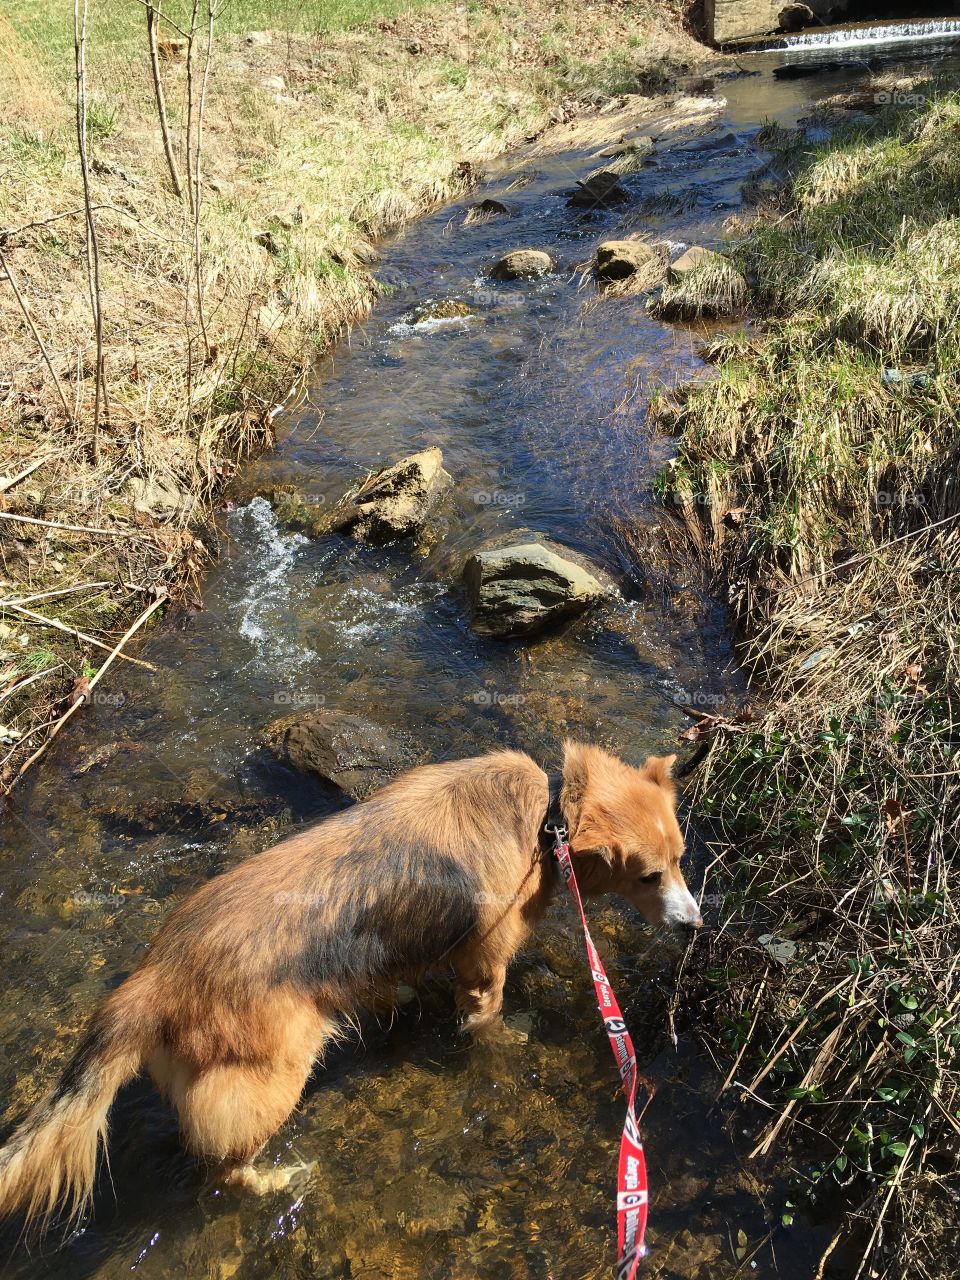 Maggie, a collie-shepherd mix, quenches her thirst in a stream at Fort Mountain, GA.